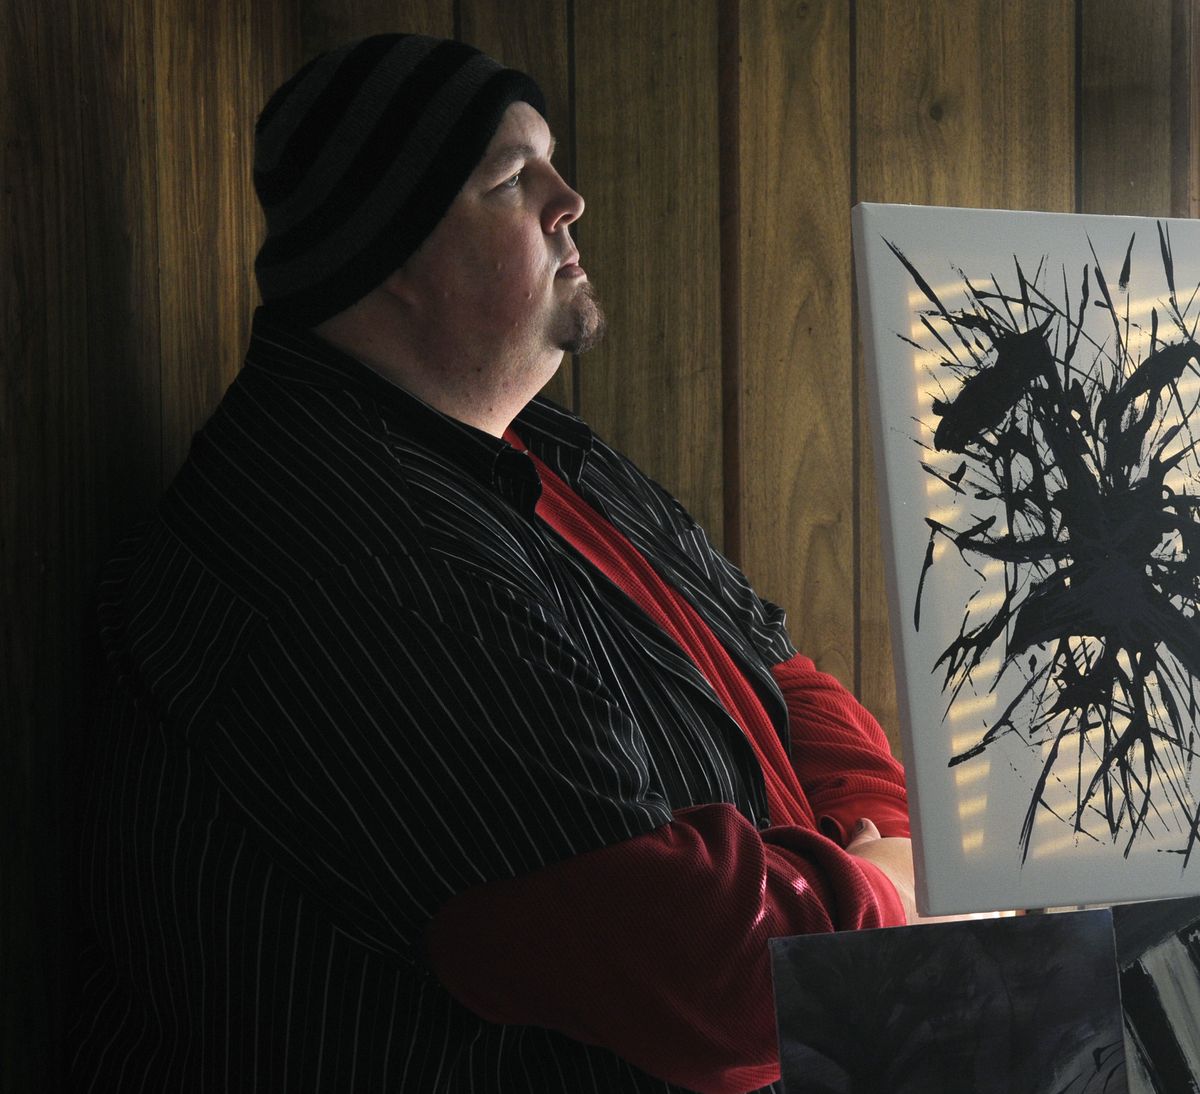 John Wood, of Airway Heights, is musician and about a year ago began painting abstracts.  (PHOTOS BY DAN PELLE / The Spokesman-Review)